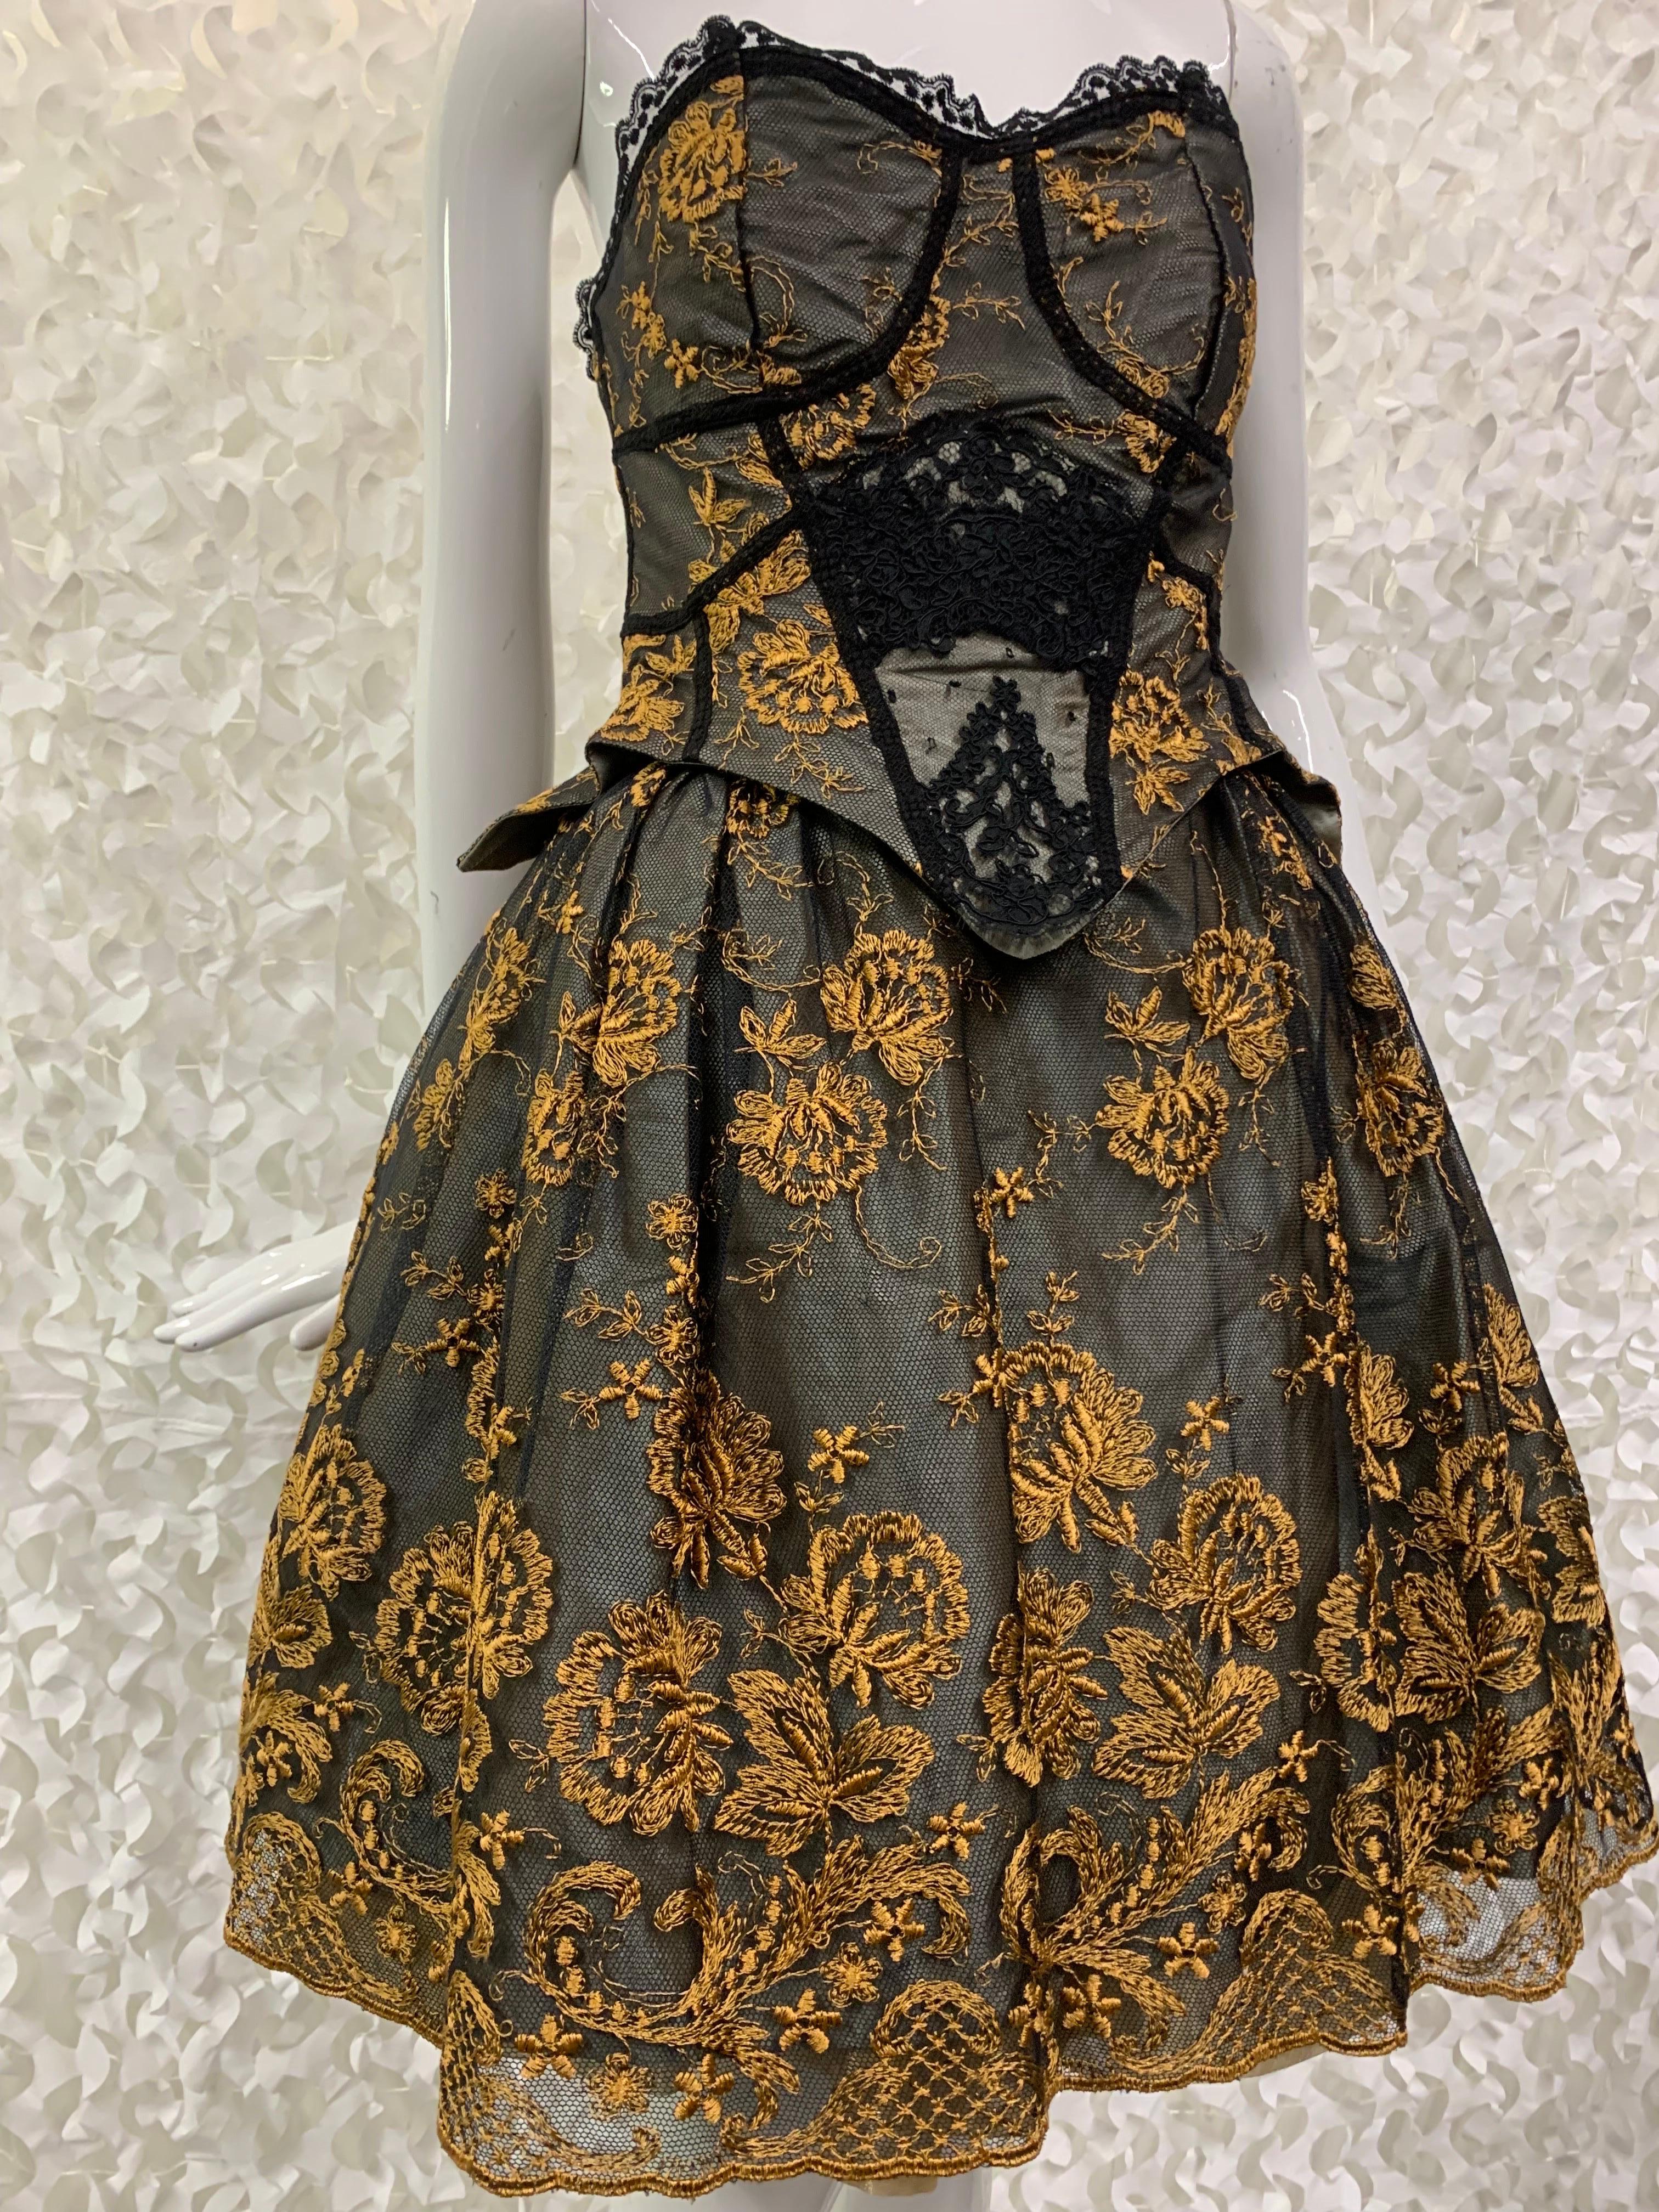 1990s Christian LaCroix Strapless Merry Widow Dress w Pouf Skirt in Black Lace For Sale 3